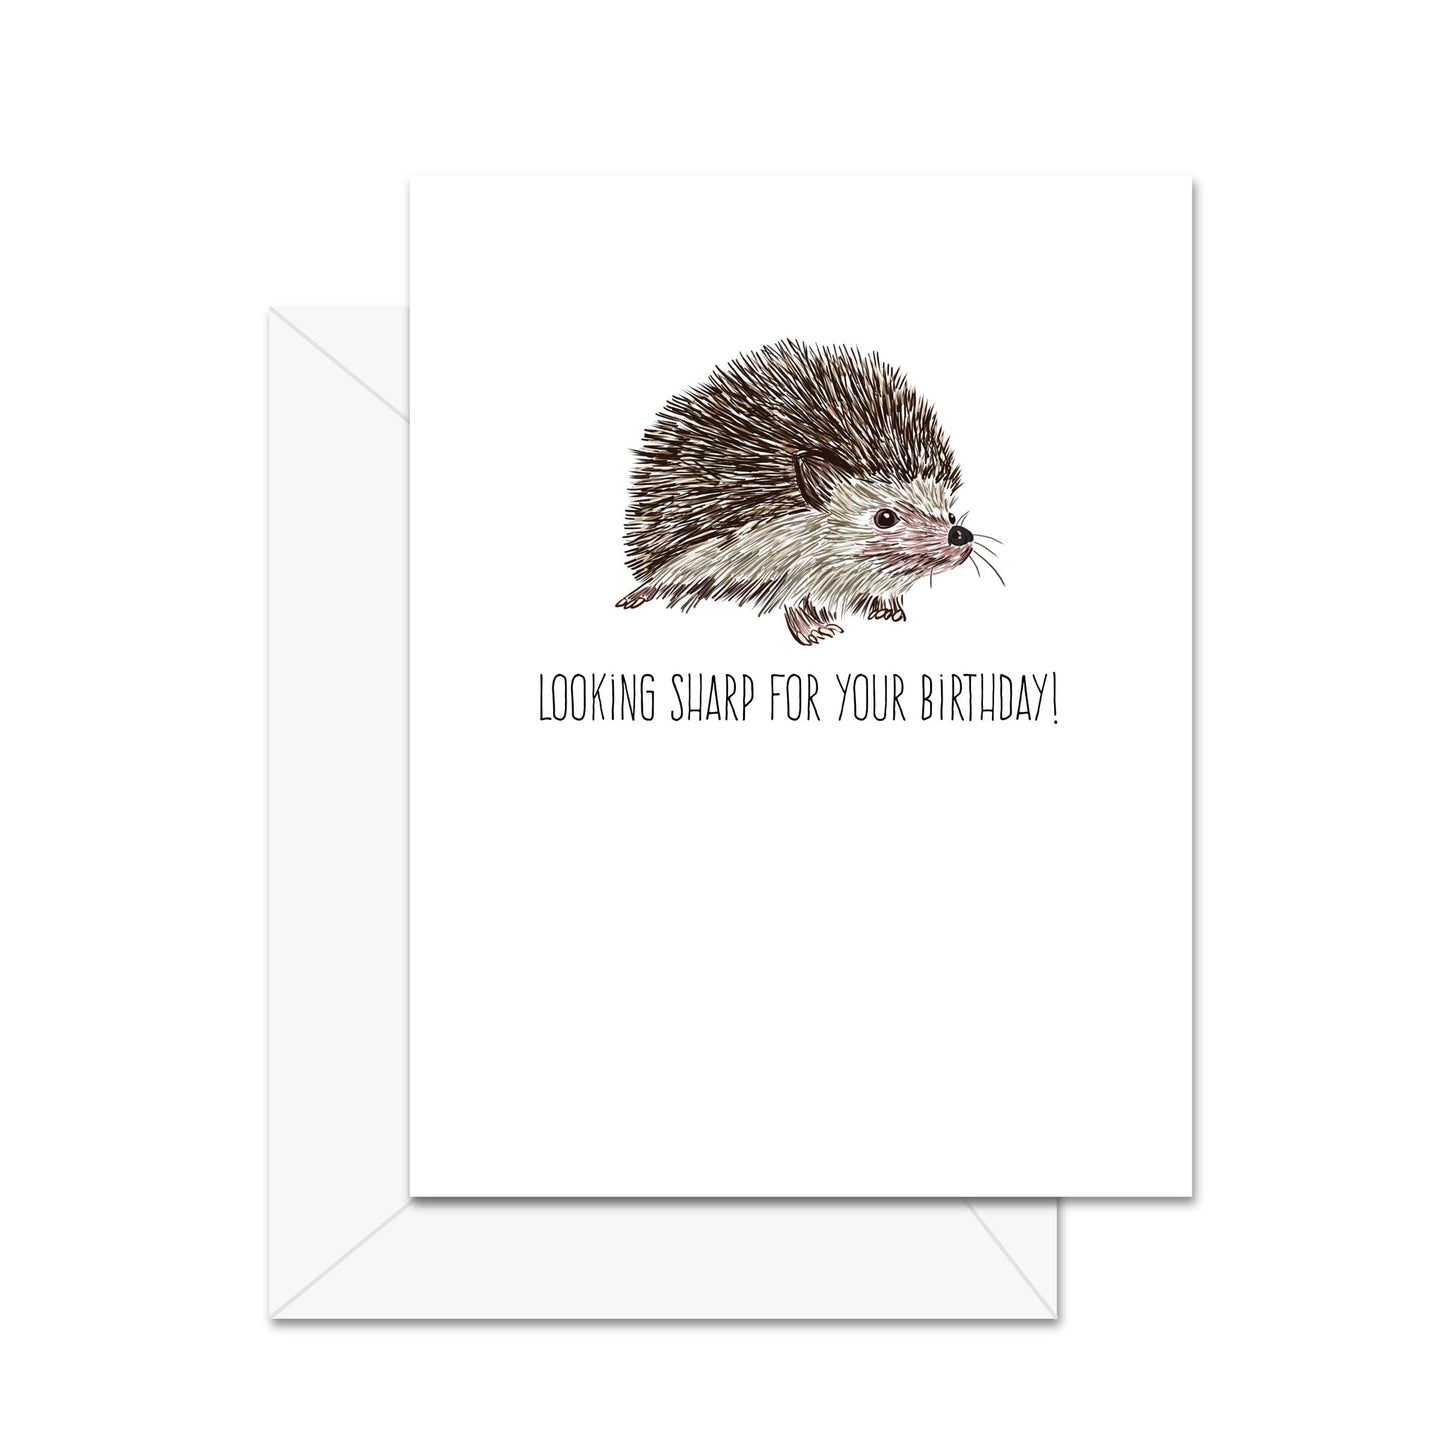 Looking Sharp For Your Birthday! - Greeting Card